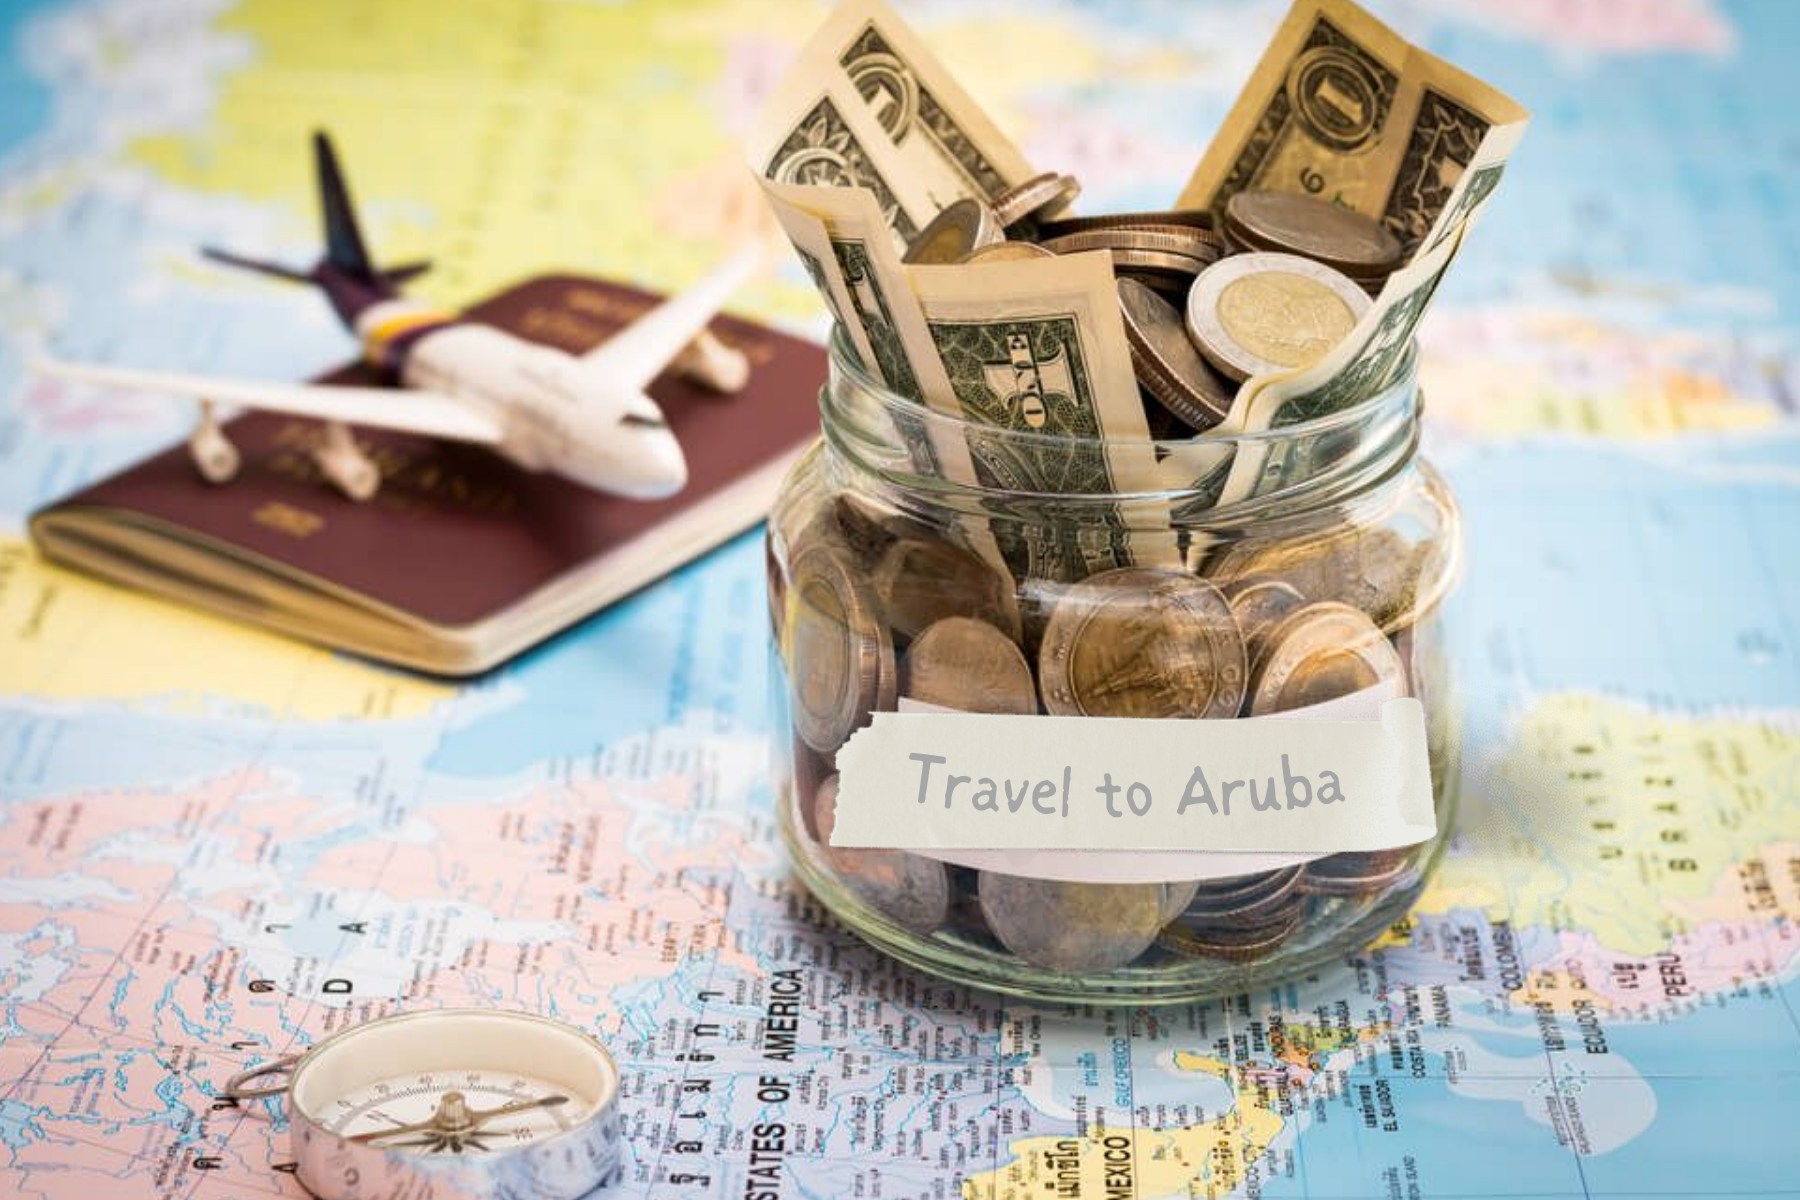 A little jar glass with money and the label "Travel to Aruba" on top of the map, as well as a miniature plane on top of the passport